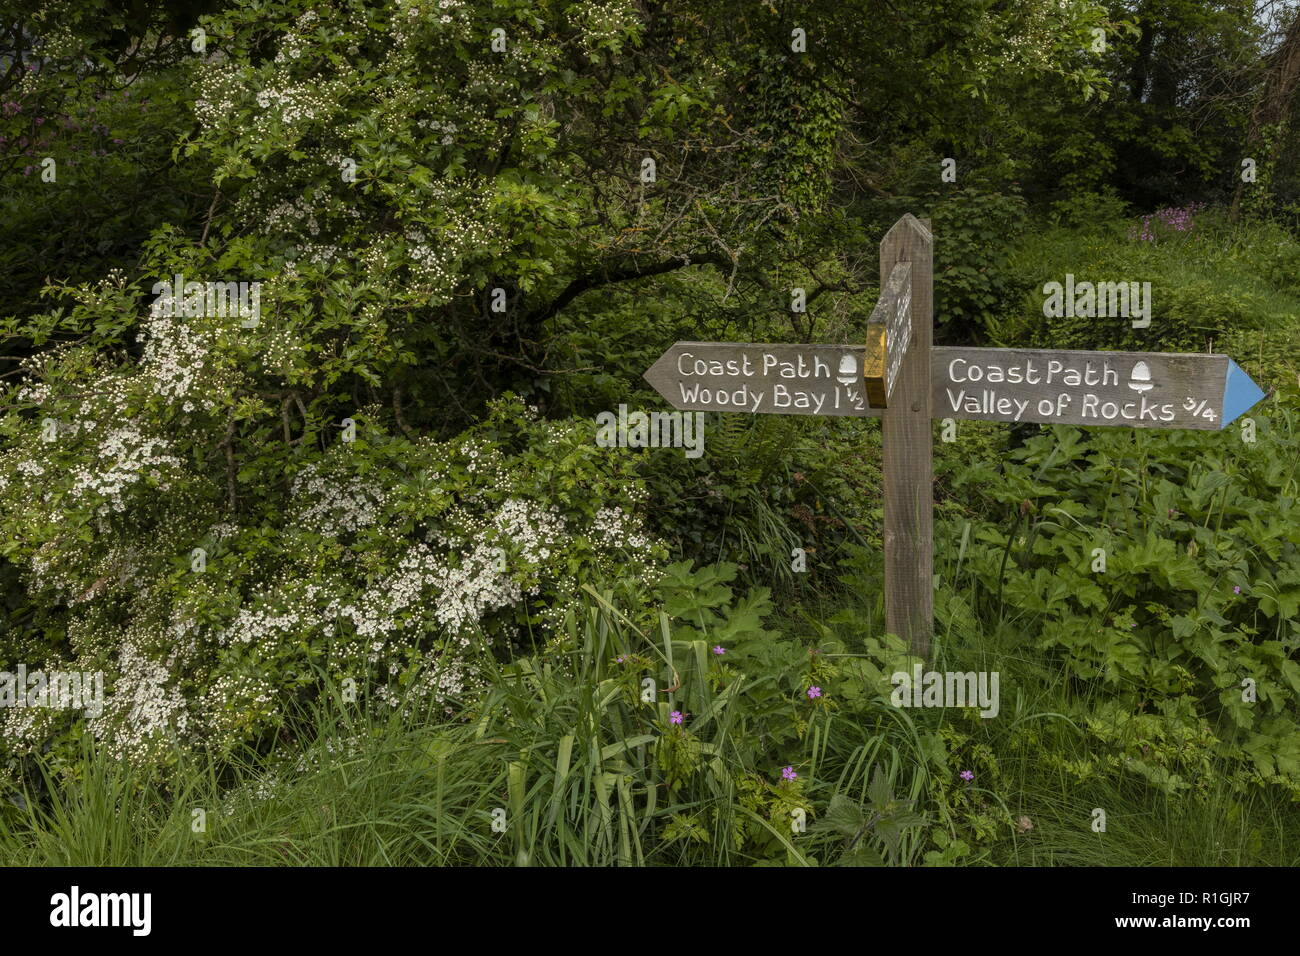 Wooden footpath sign at Lee Bay on the coast path between Woody Bay and Valley of the Rocks. Stock Photo